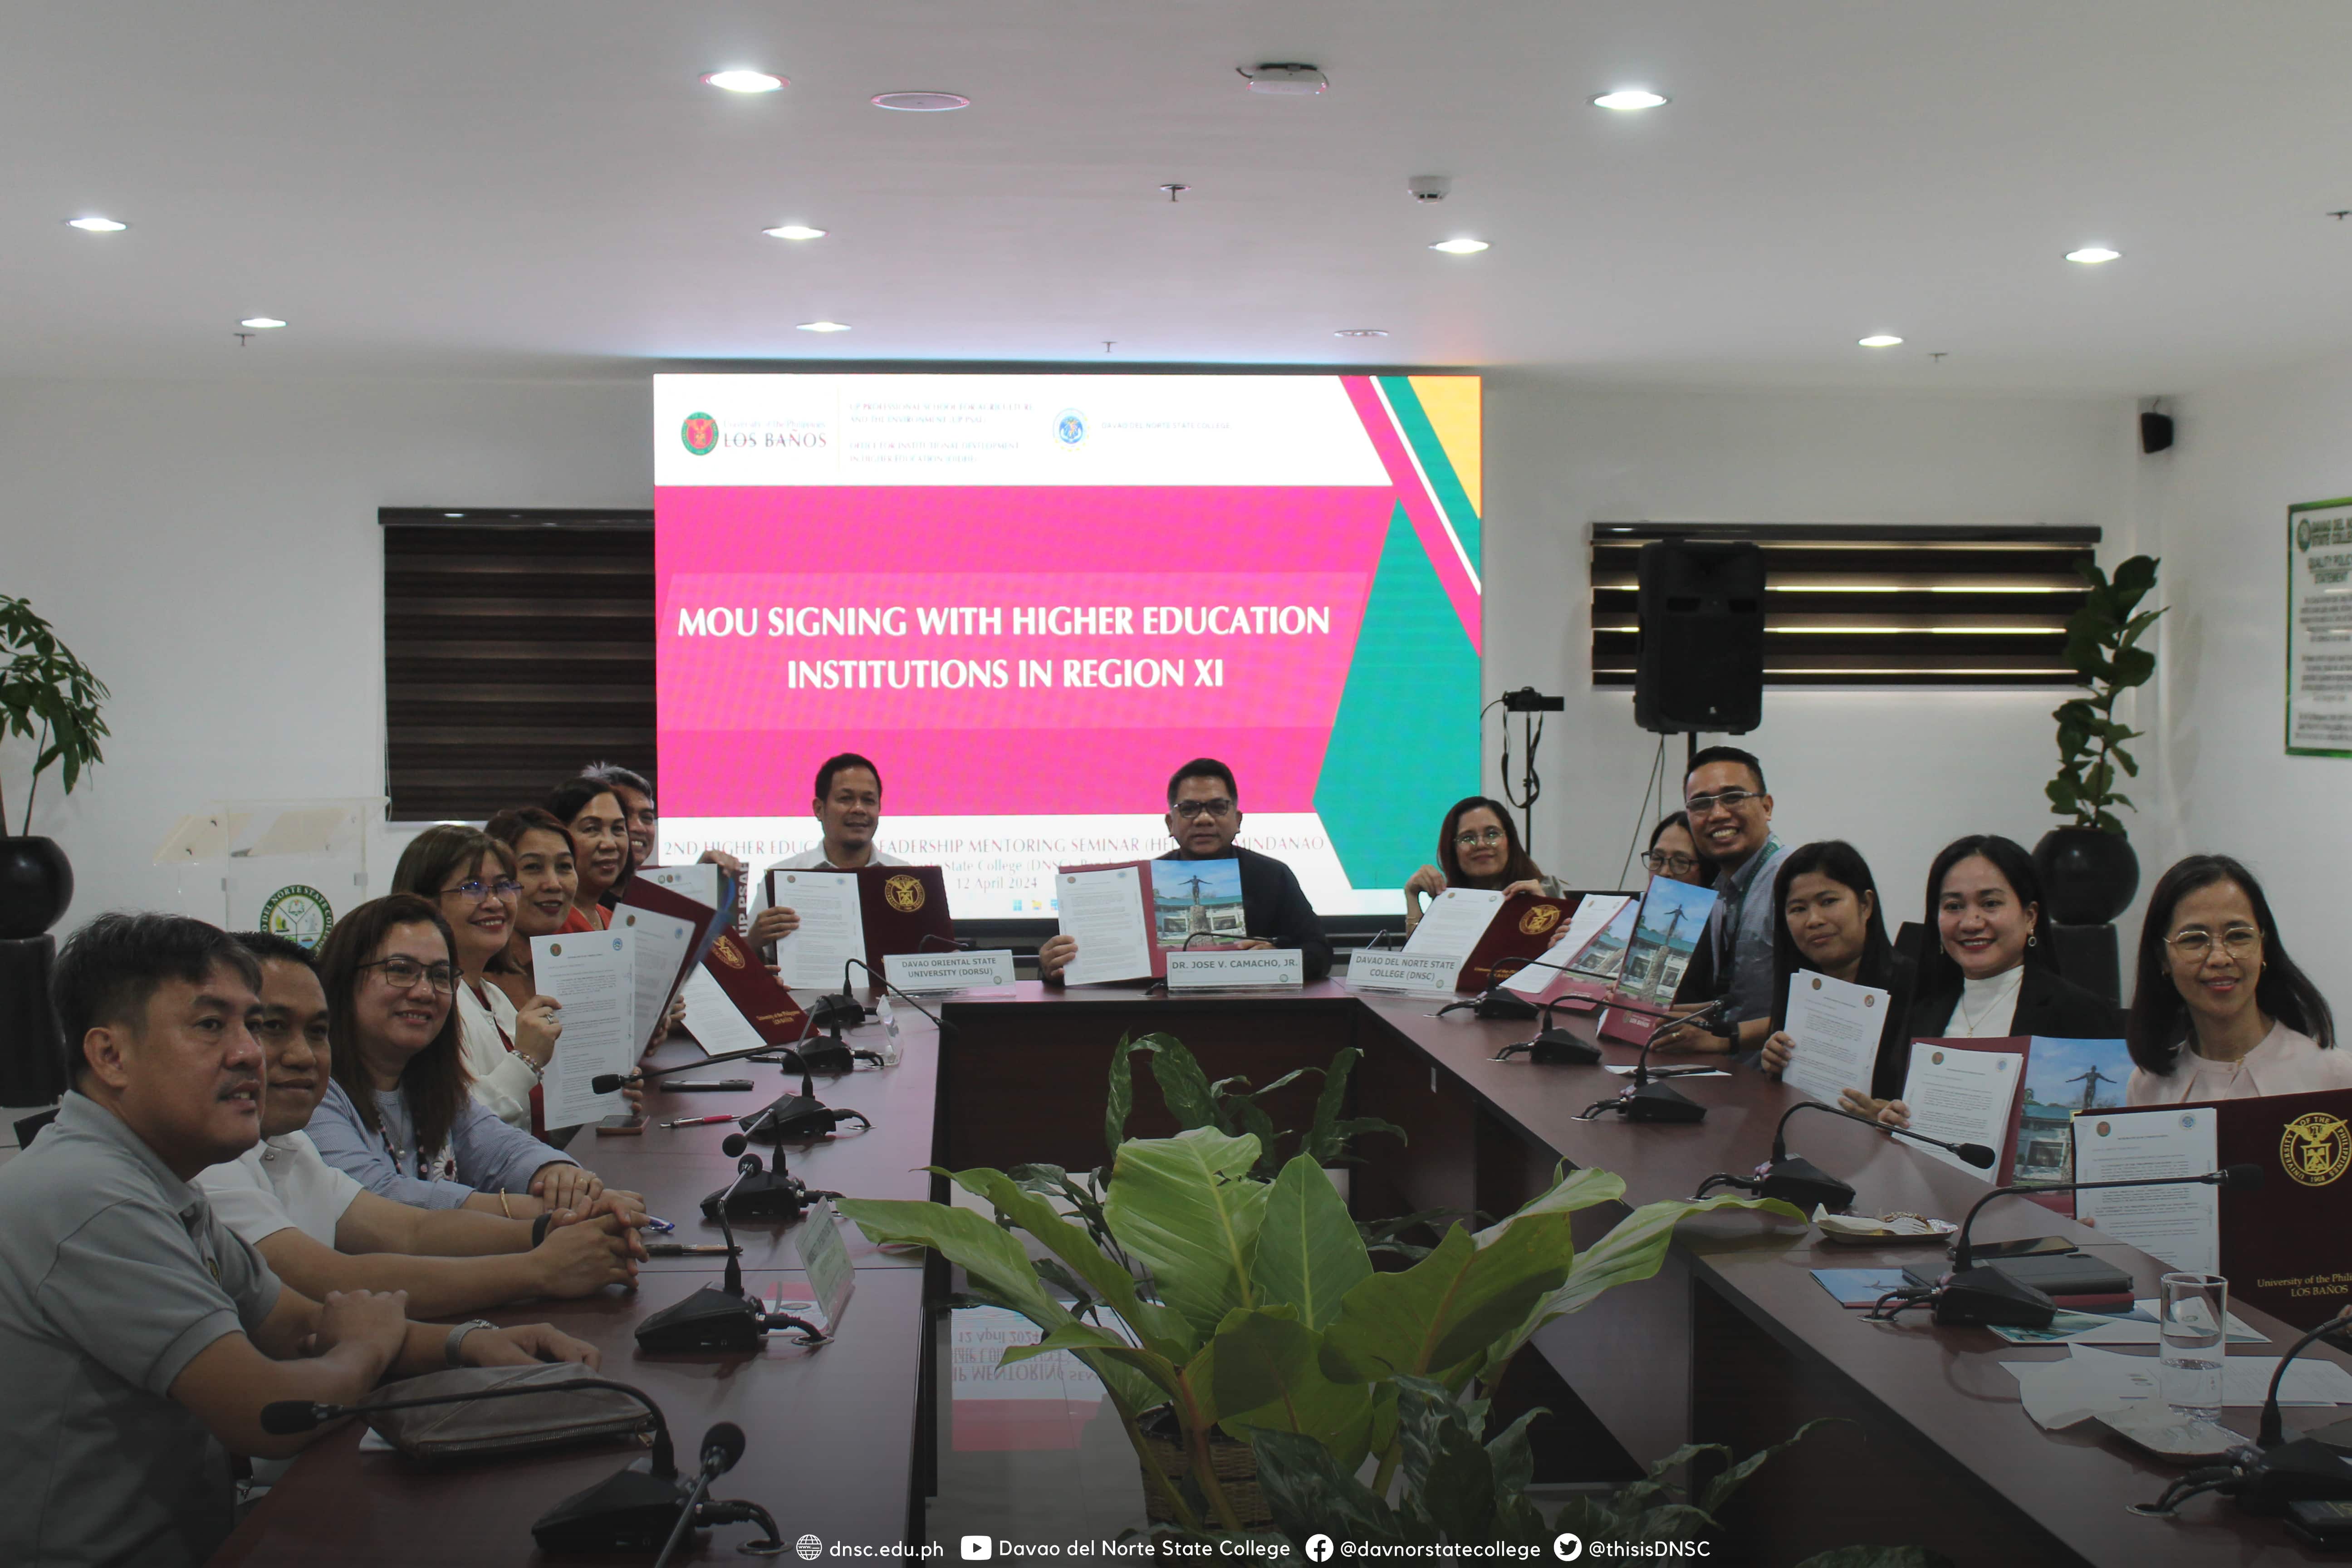 DNSC responds to UPLB’s call for collaboration to propel the nation forward